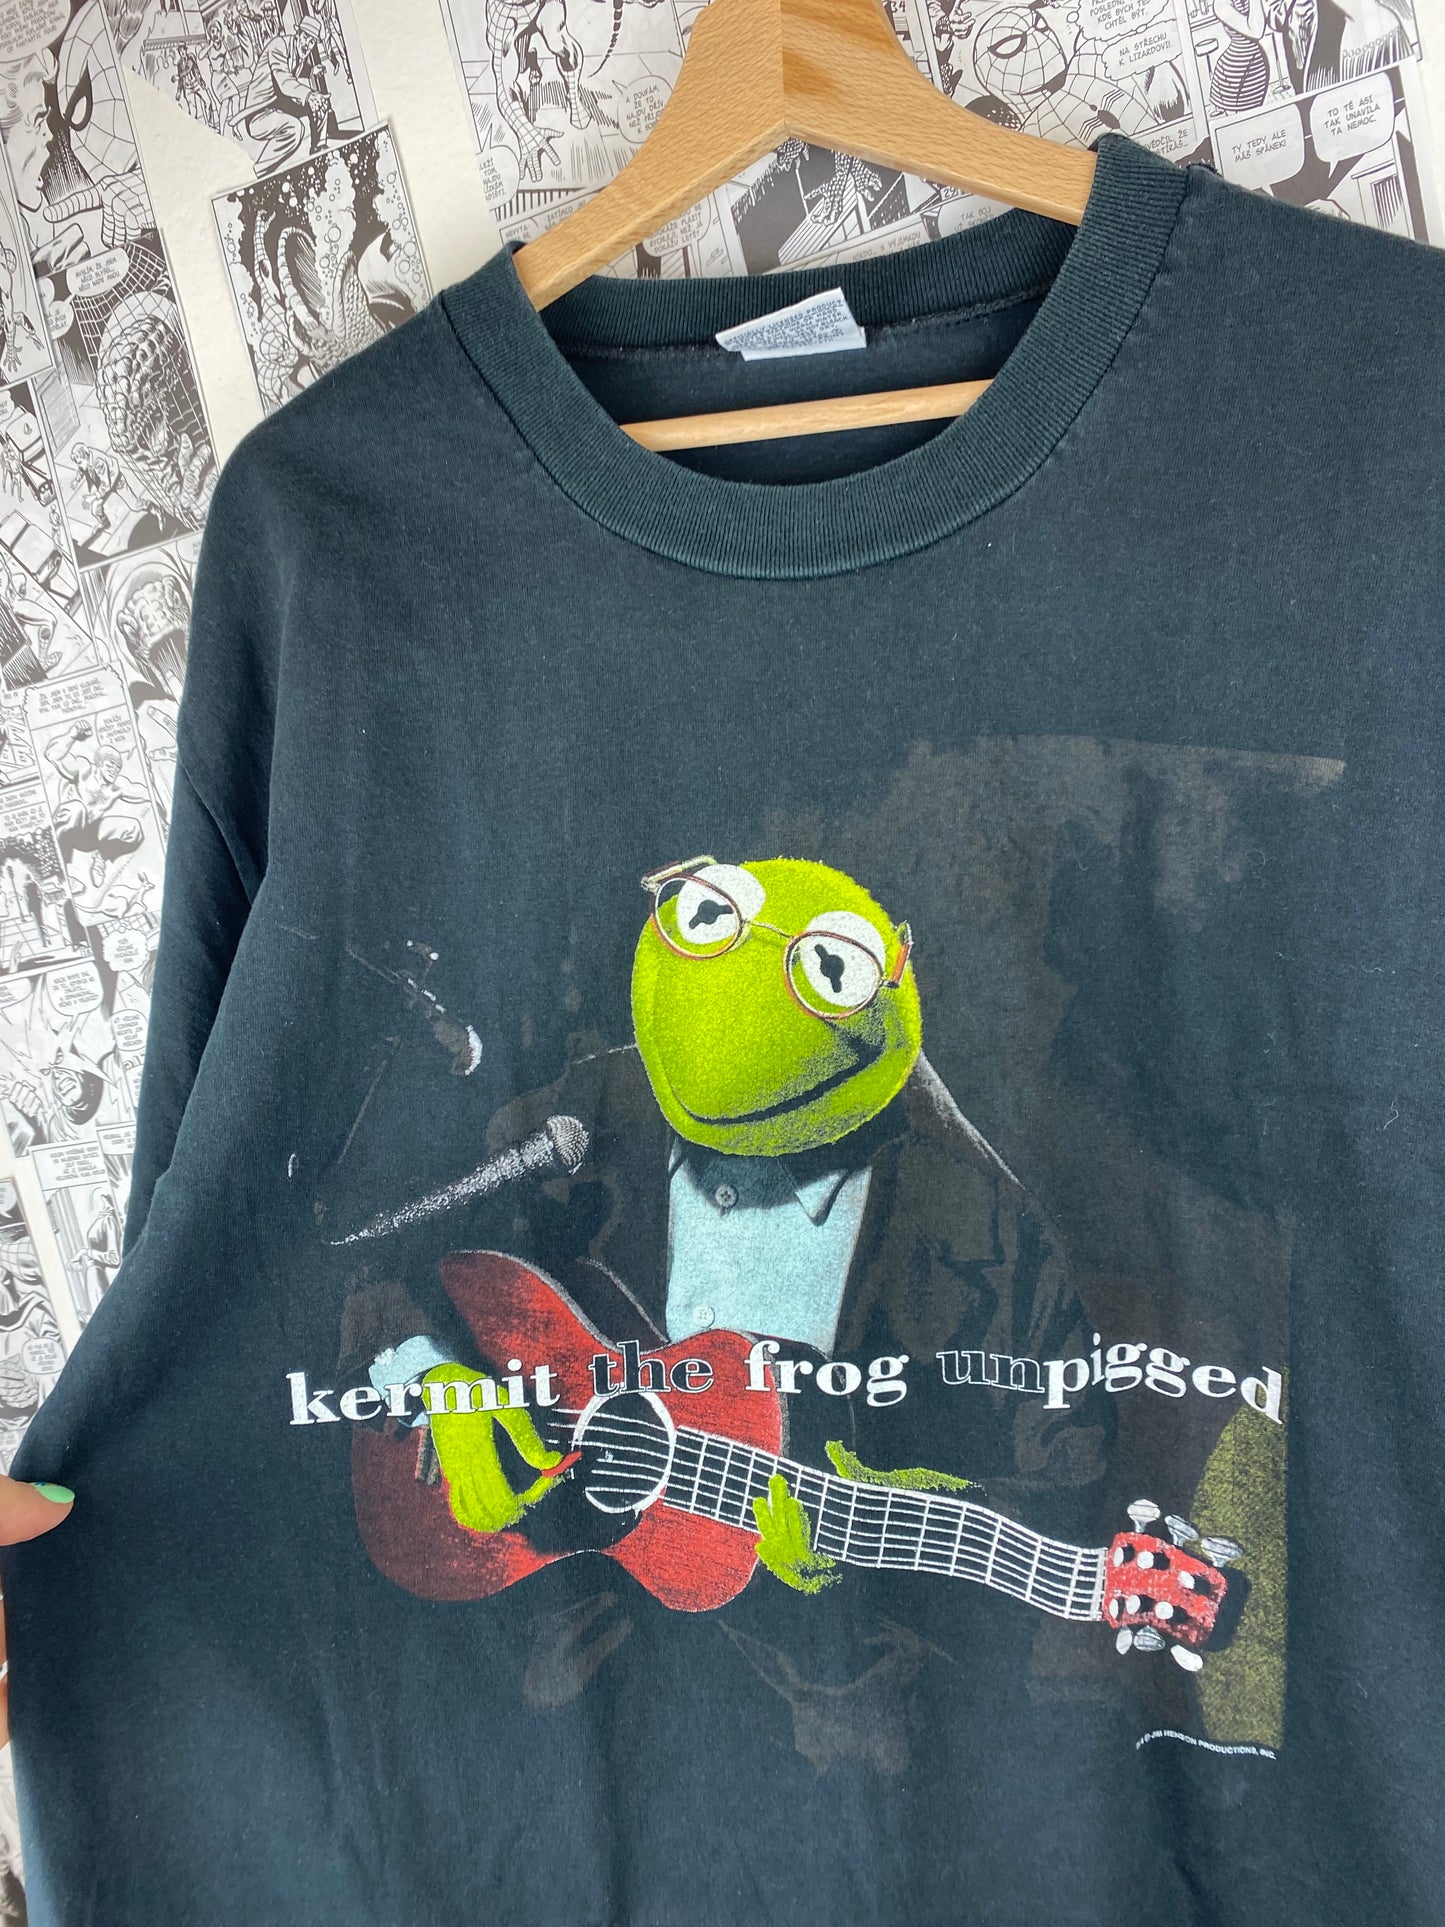 Vintage Muppets - Kermit the Frog 90s t-shirt